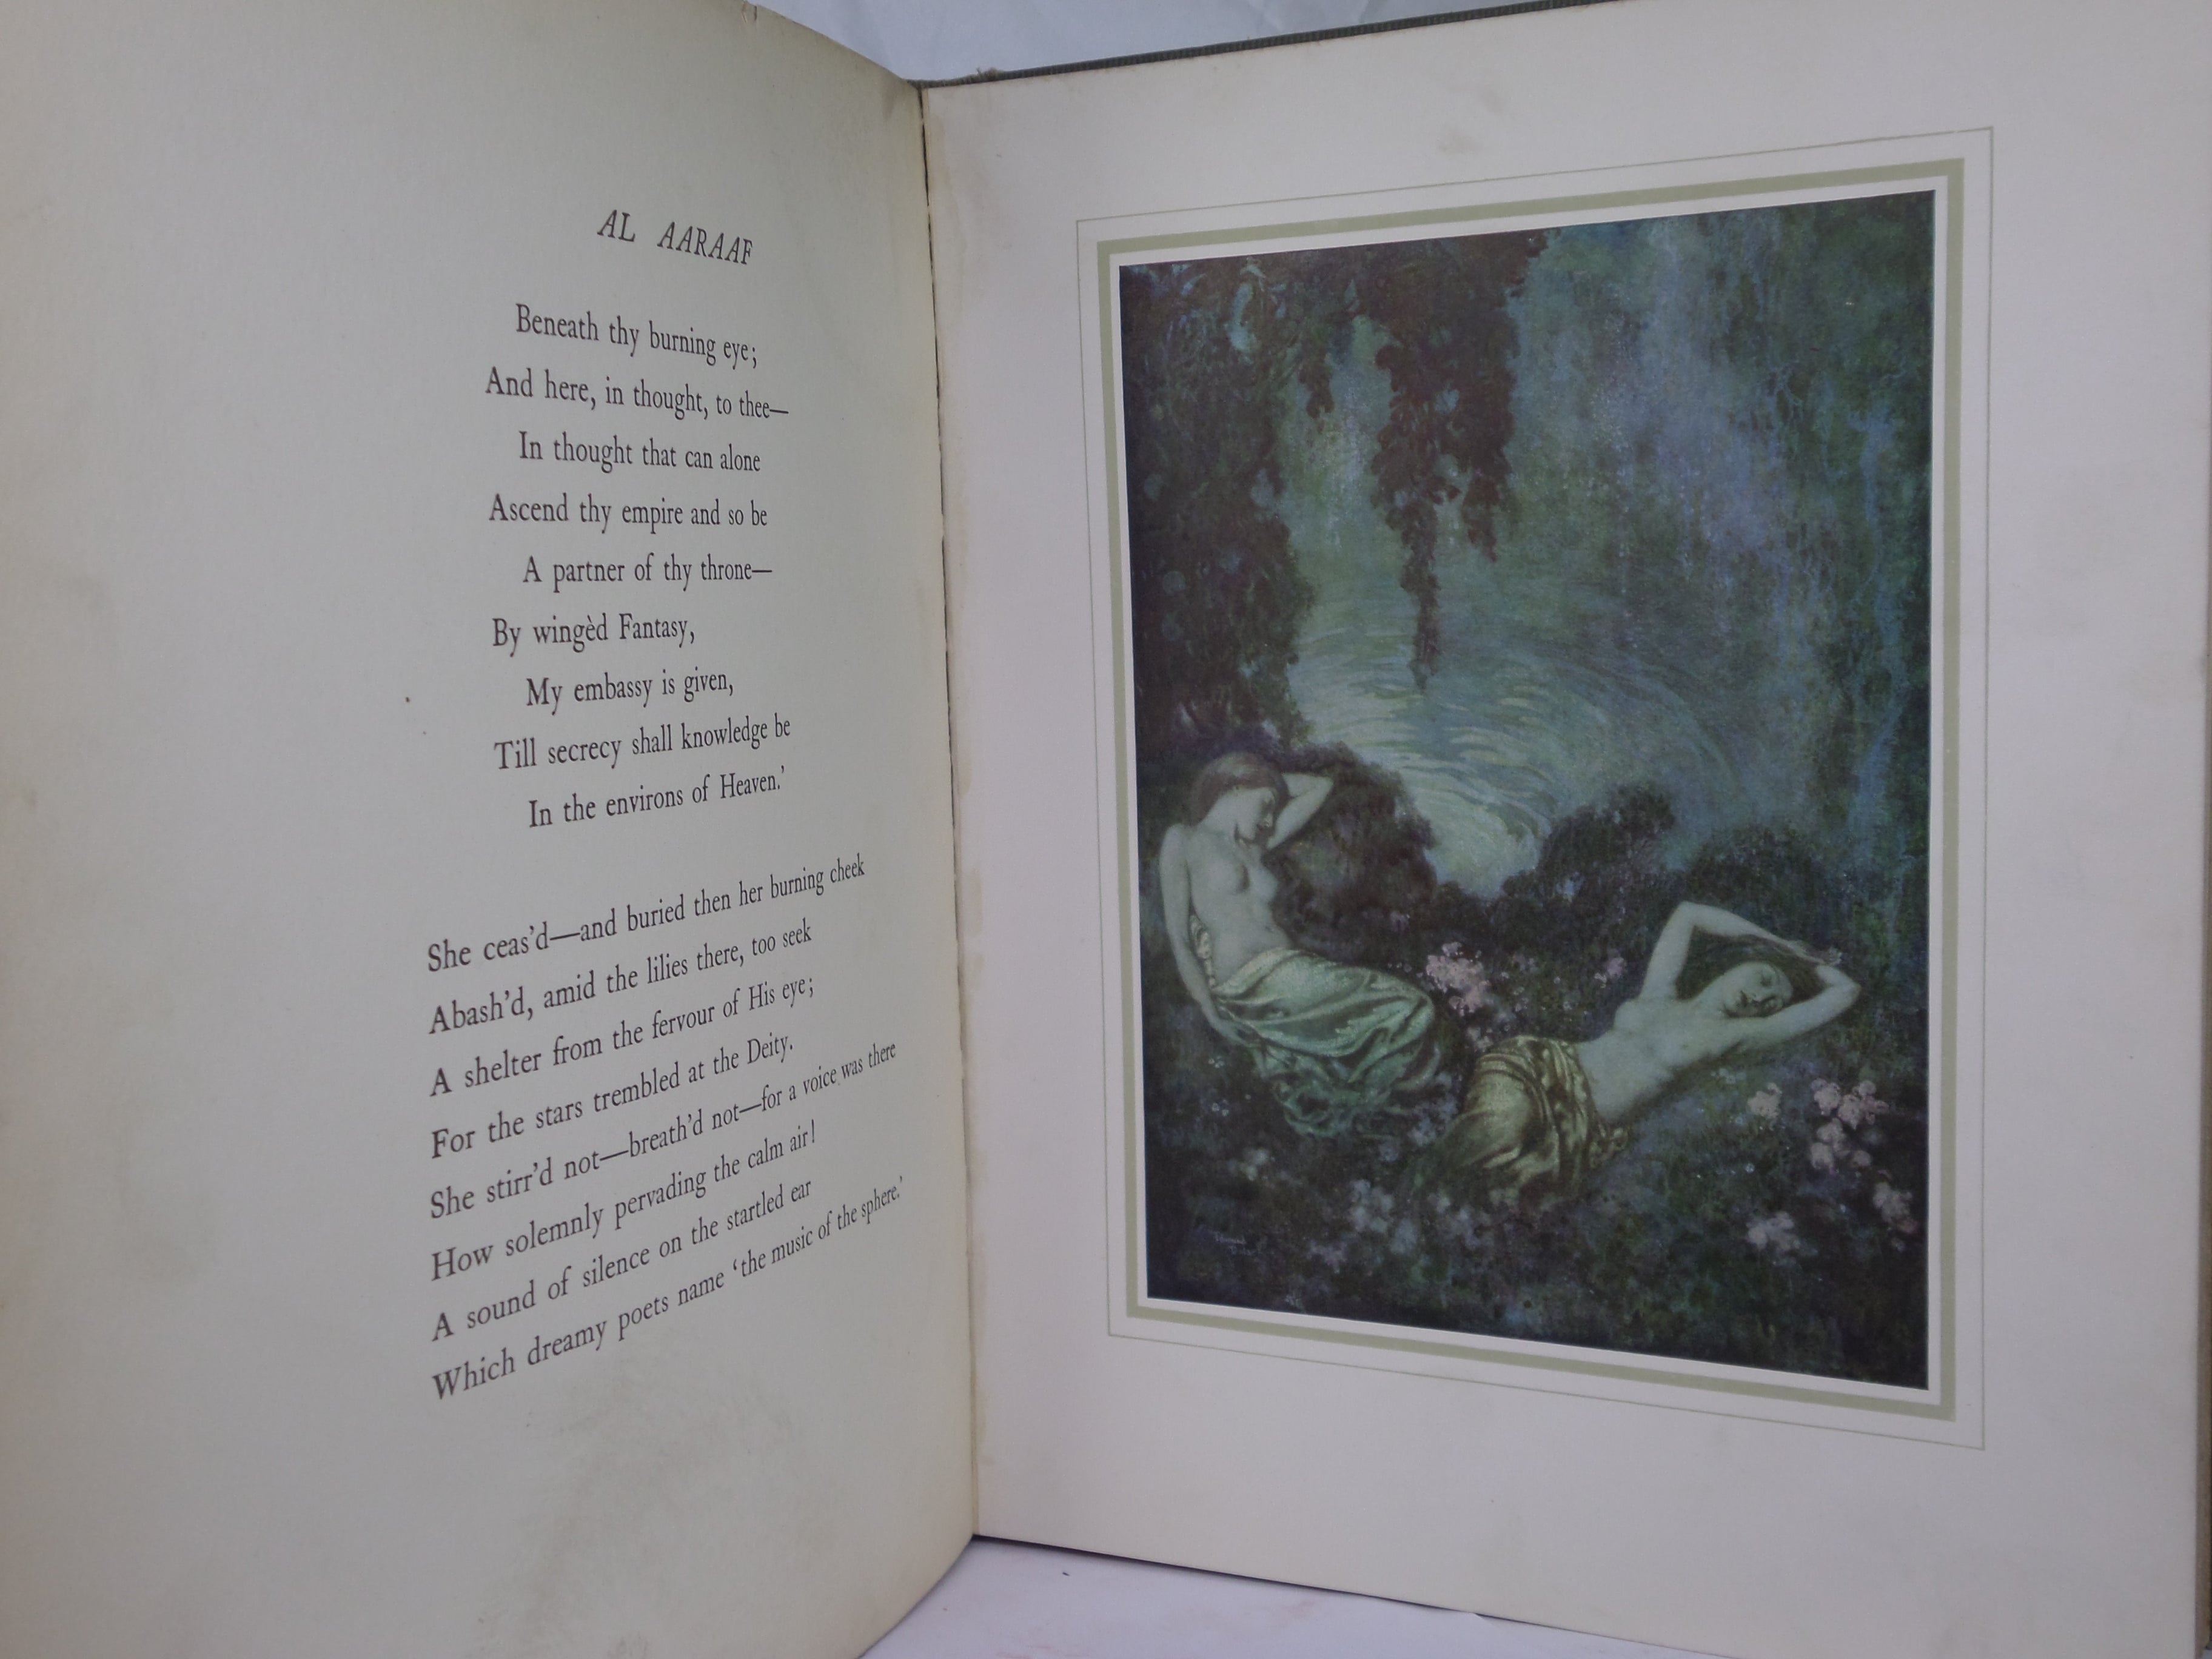 THE BELLS AND OTHER POEMS BY EDGAR ALLAN POE CA.1912 ILLUSTRATED BY EDMUND DULAC